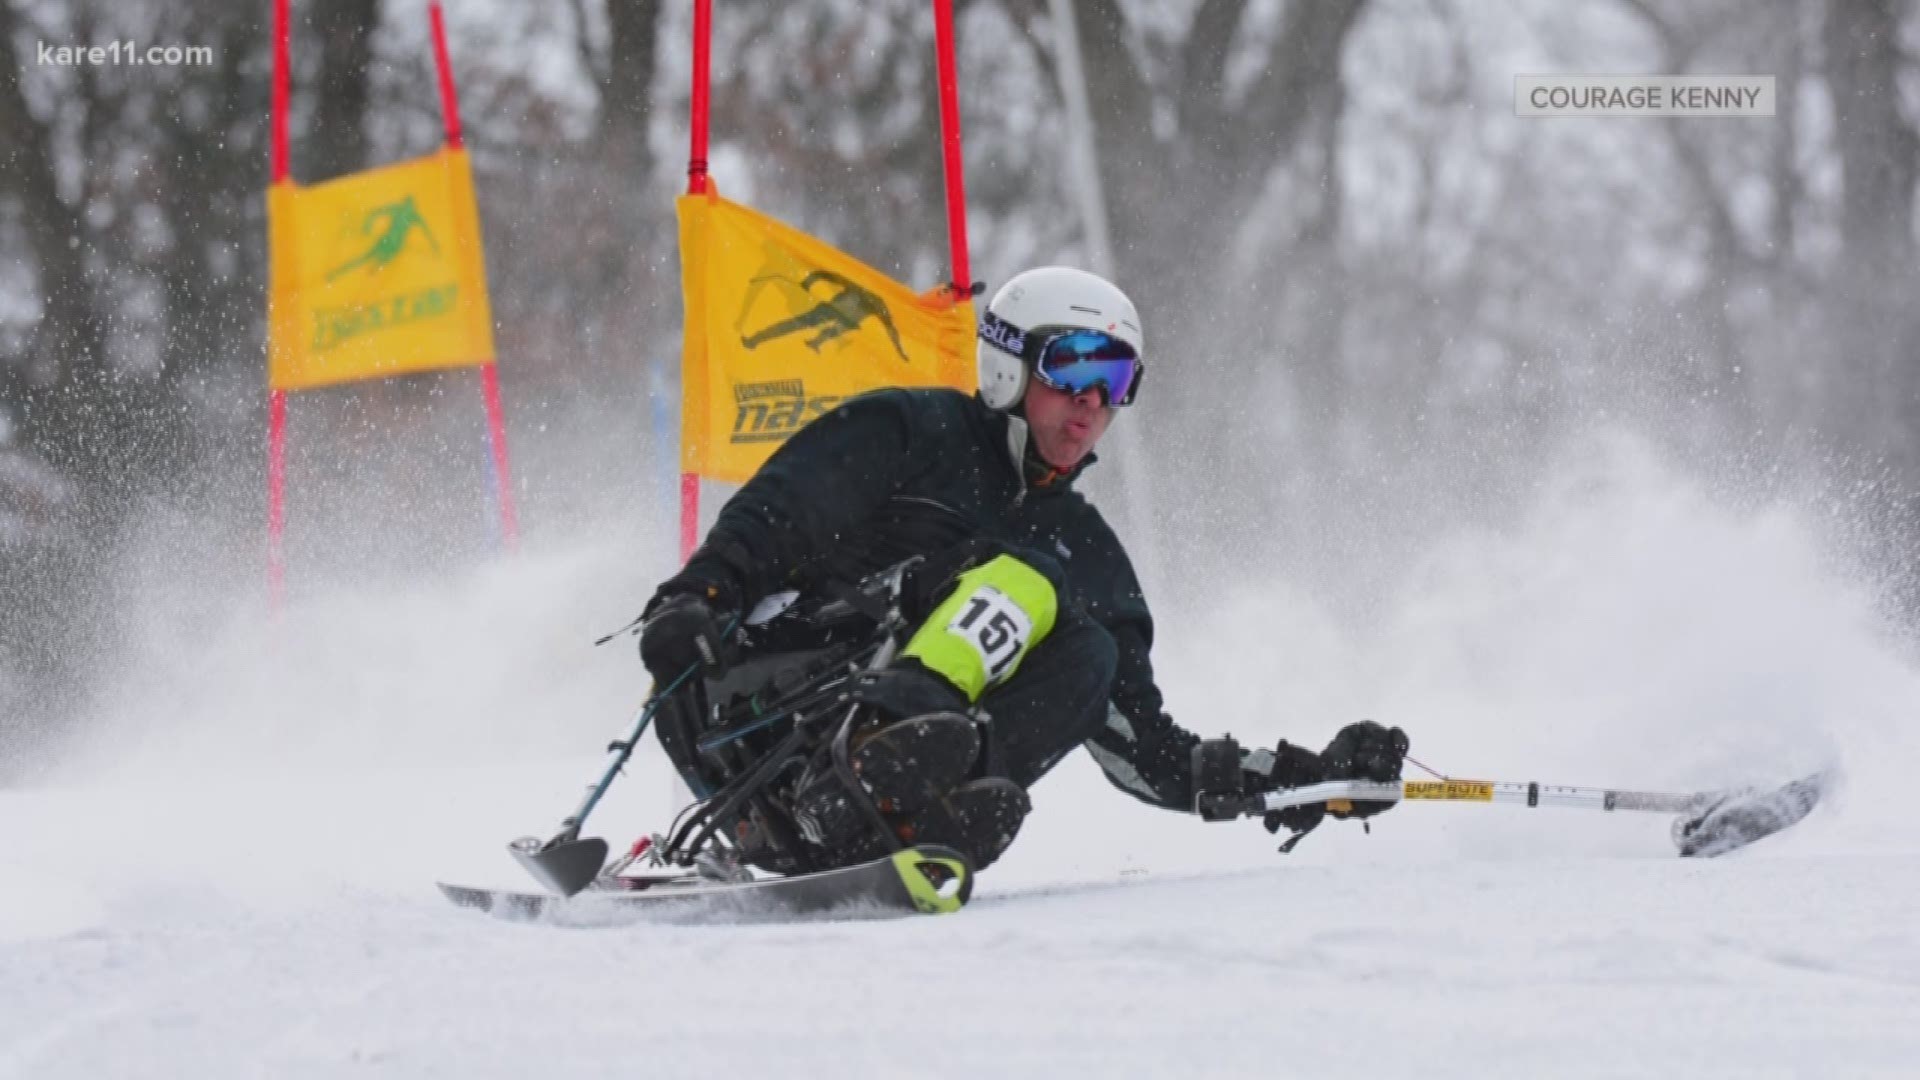 Skiers of all ages and abilities will be hit the slopes each year for the Annual Courage Kenny Cup.